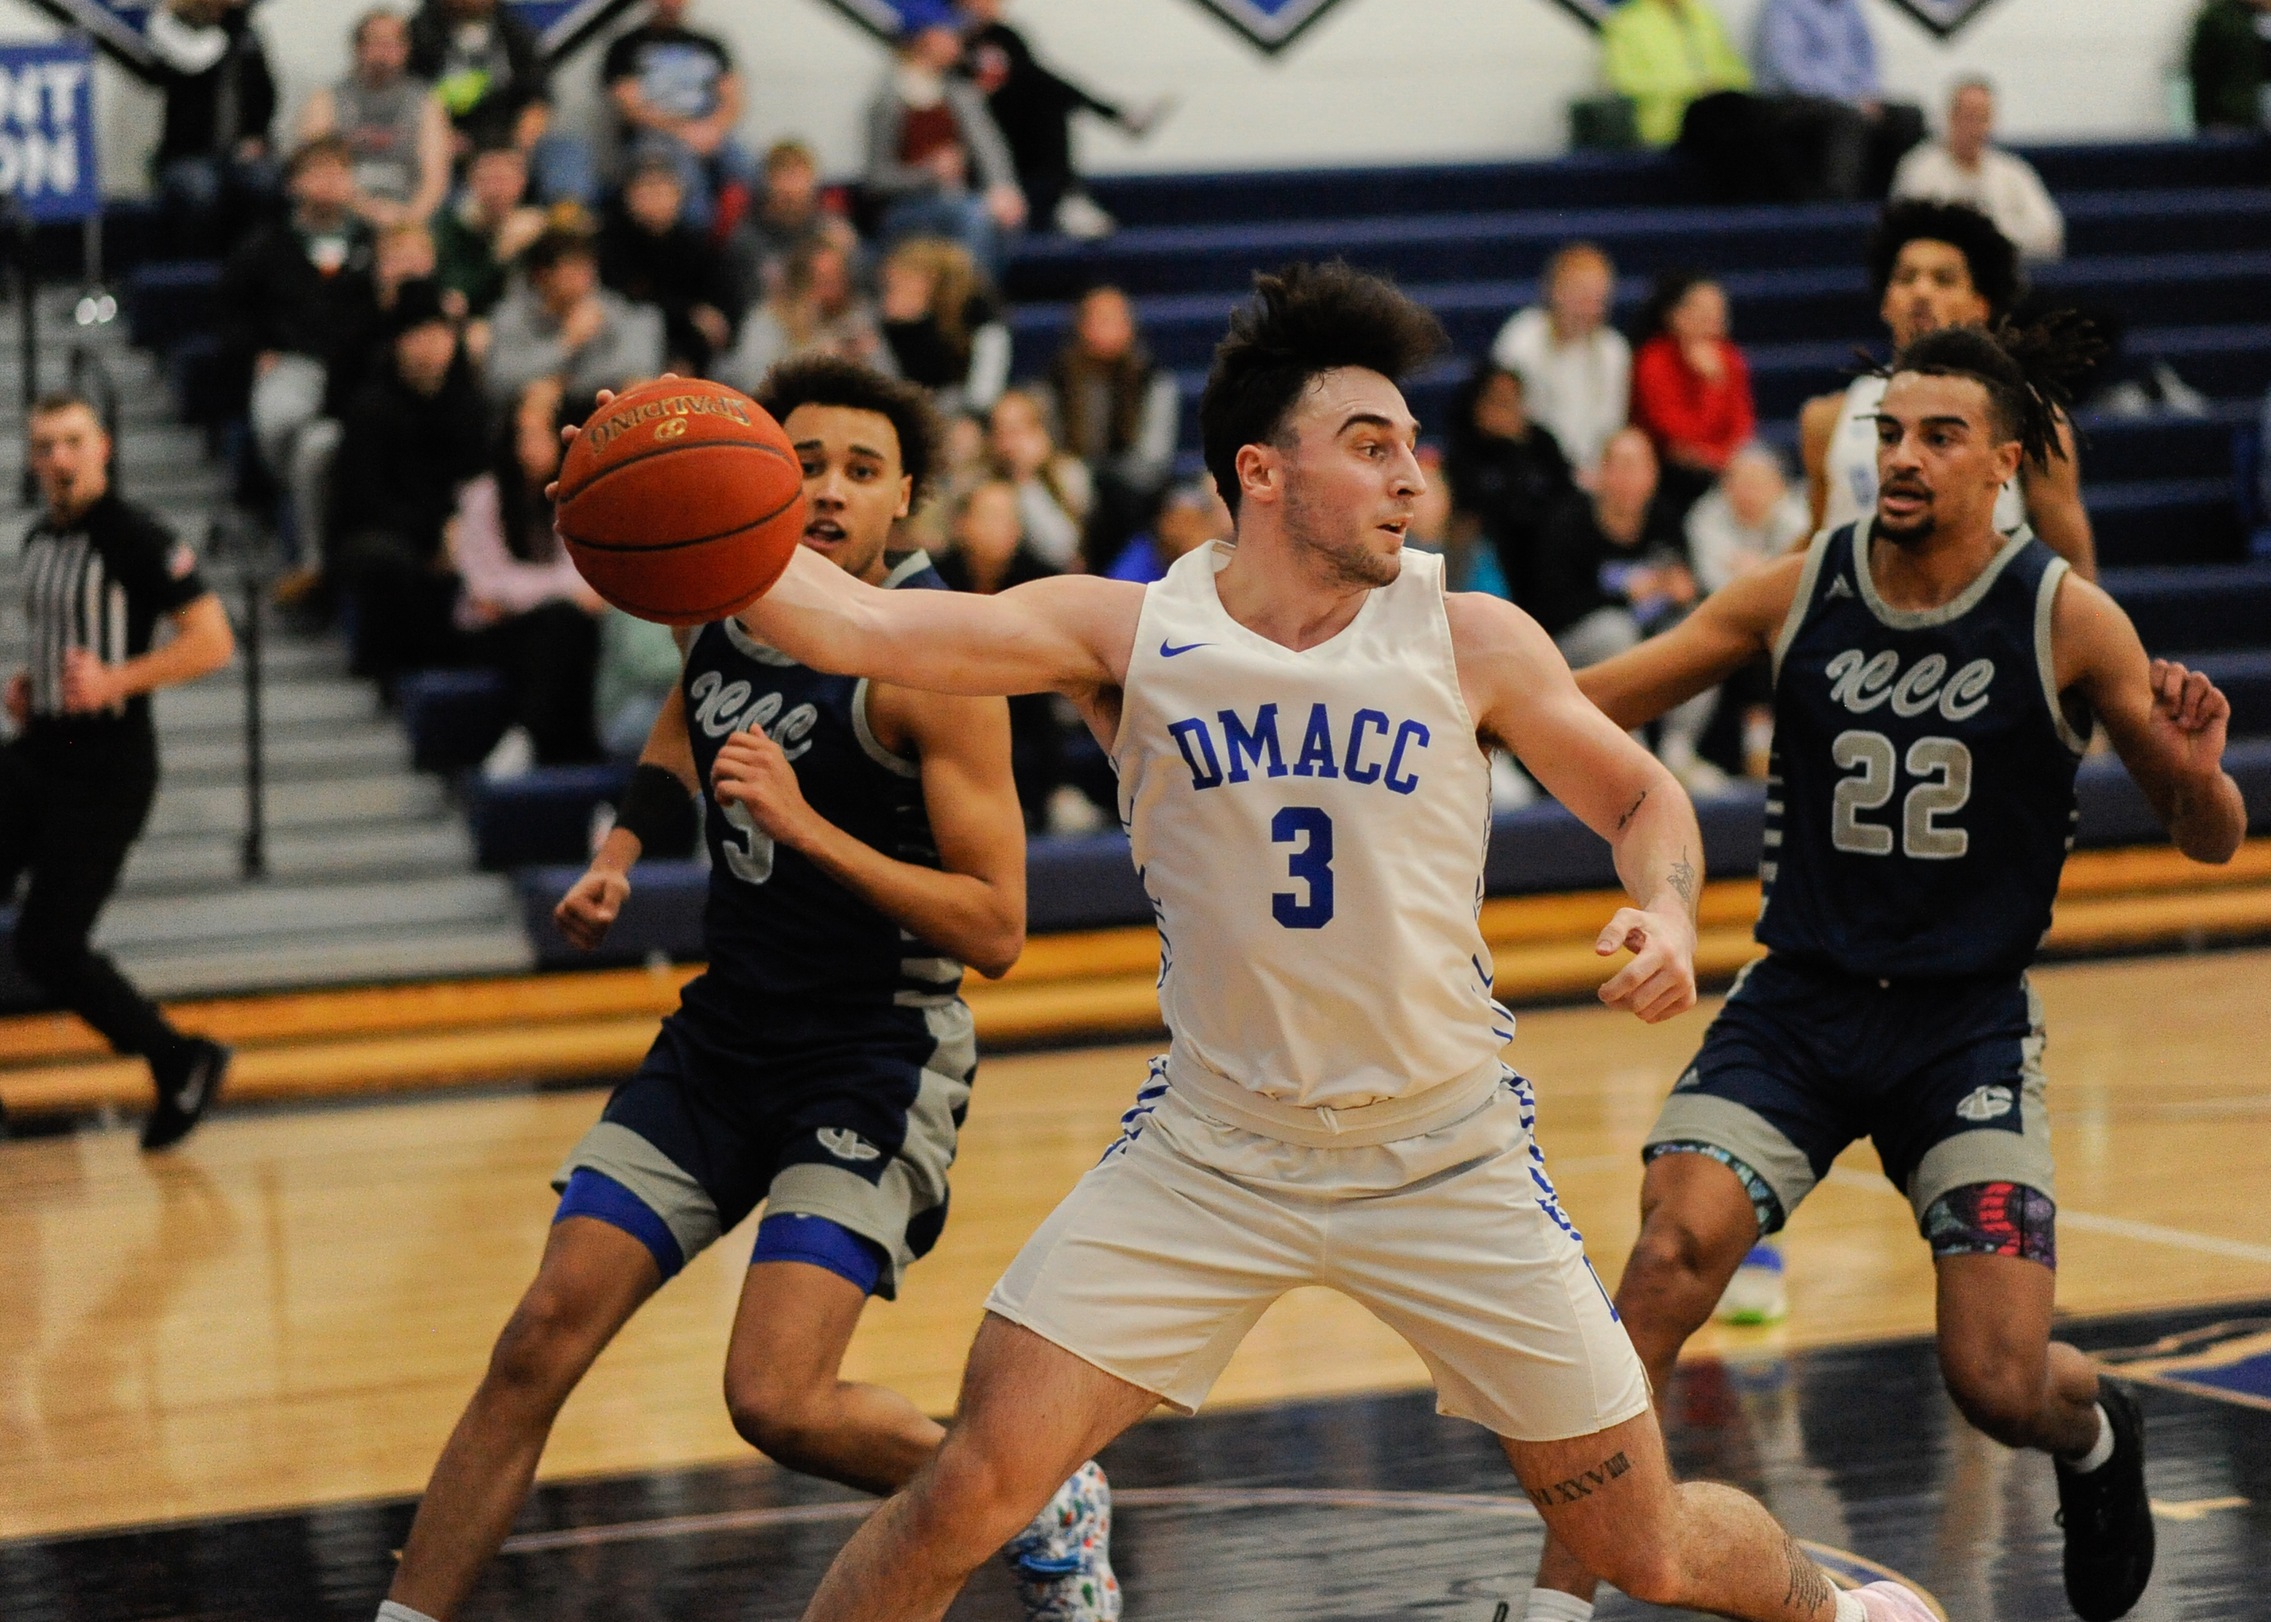 DMACC men's basketball team tops ICCC behind Cael McGee's 30-point performance